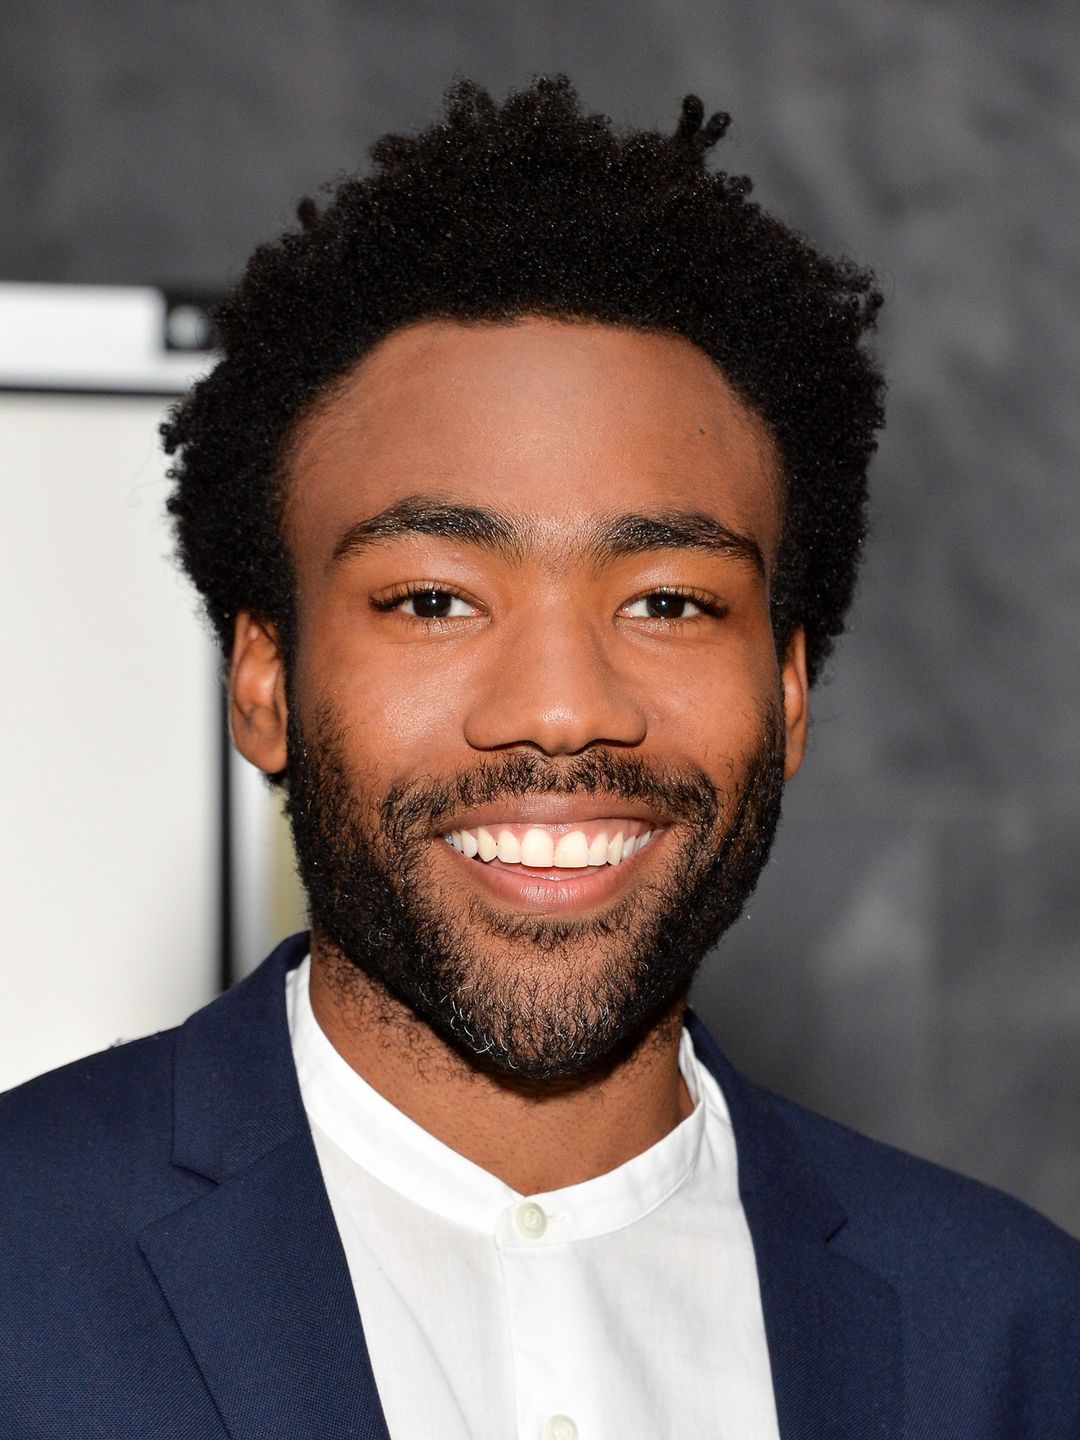 Donald Glover who is he